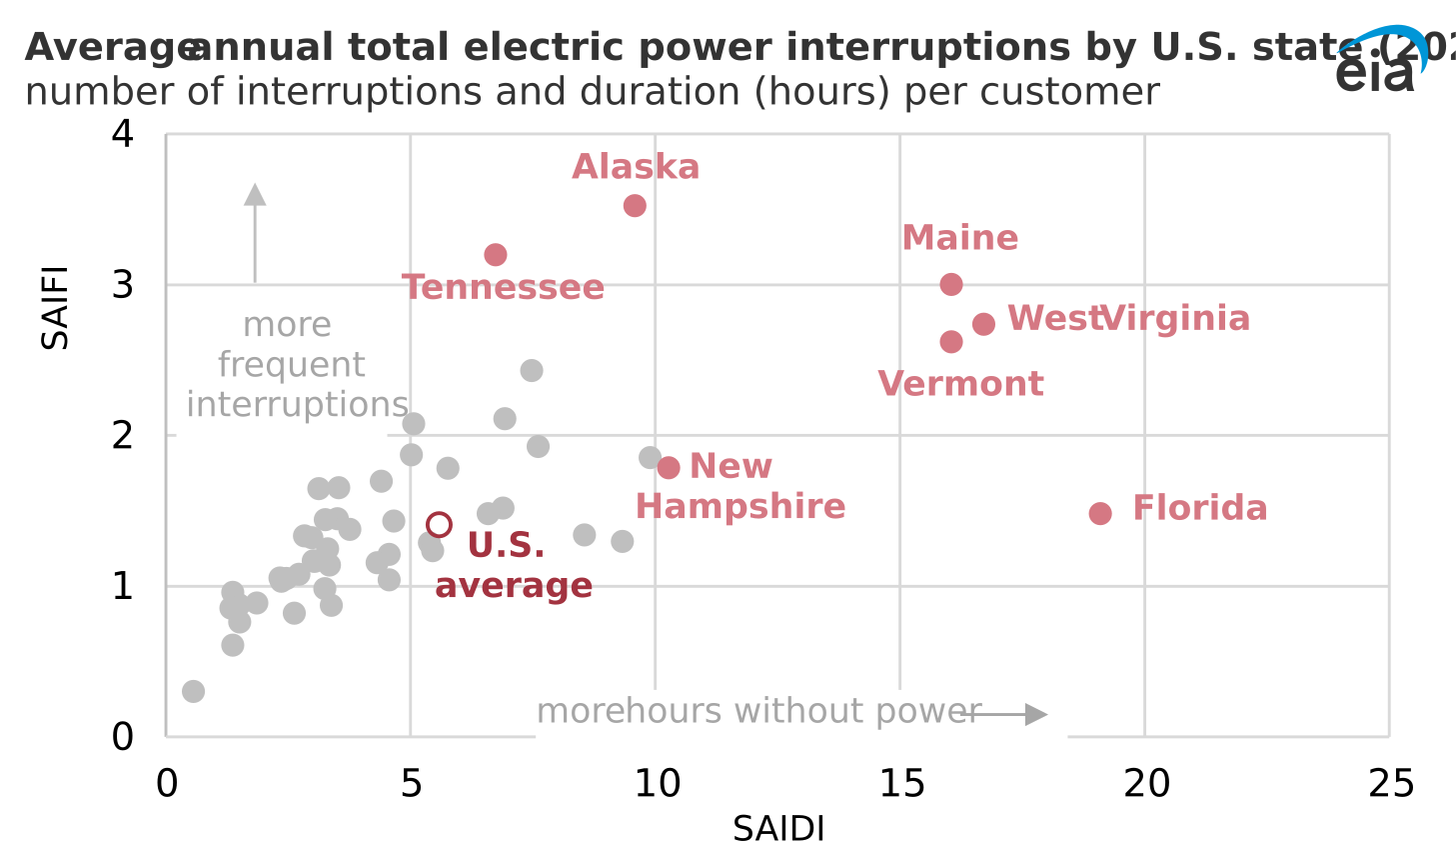 average annual total electric power interruptions by U.S. state